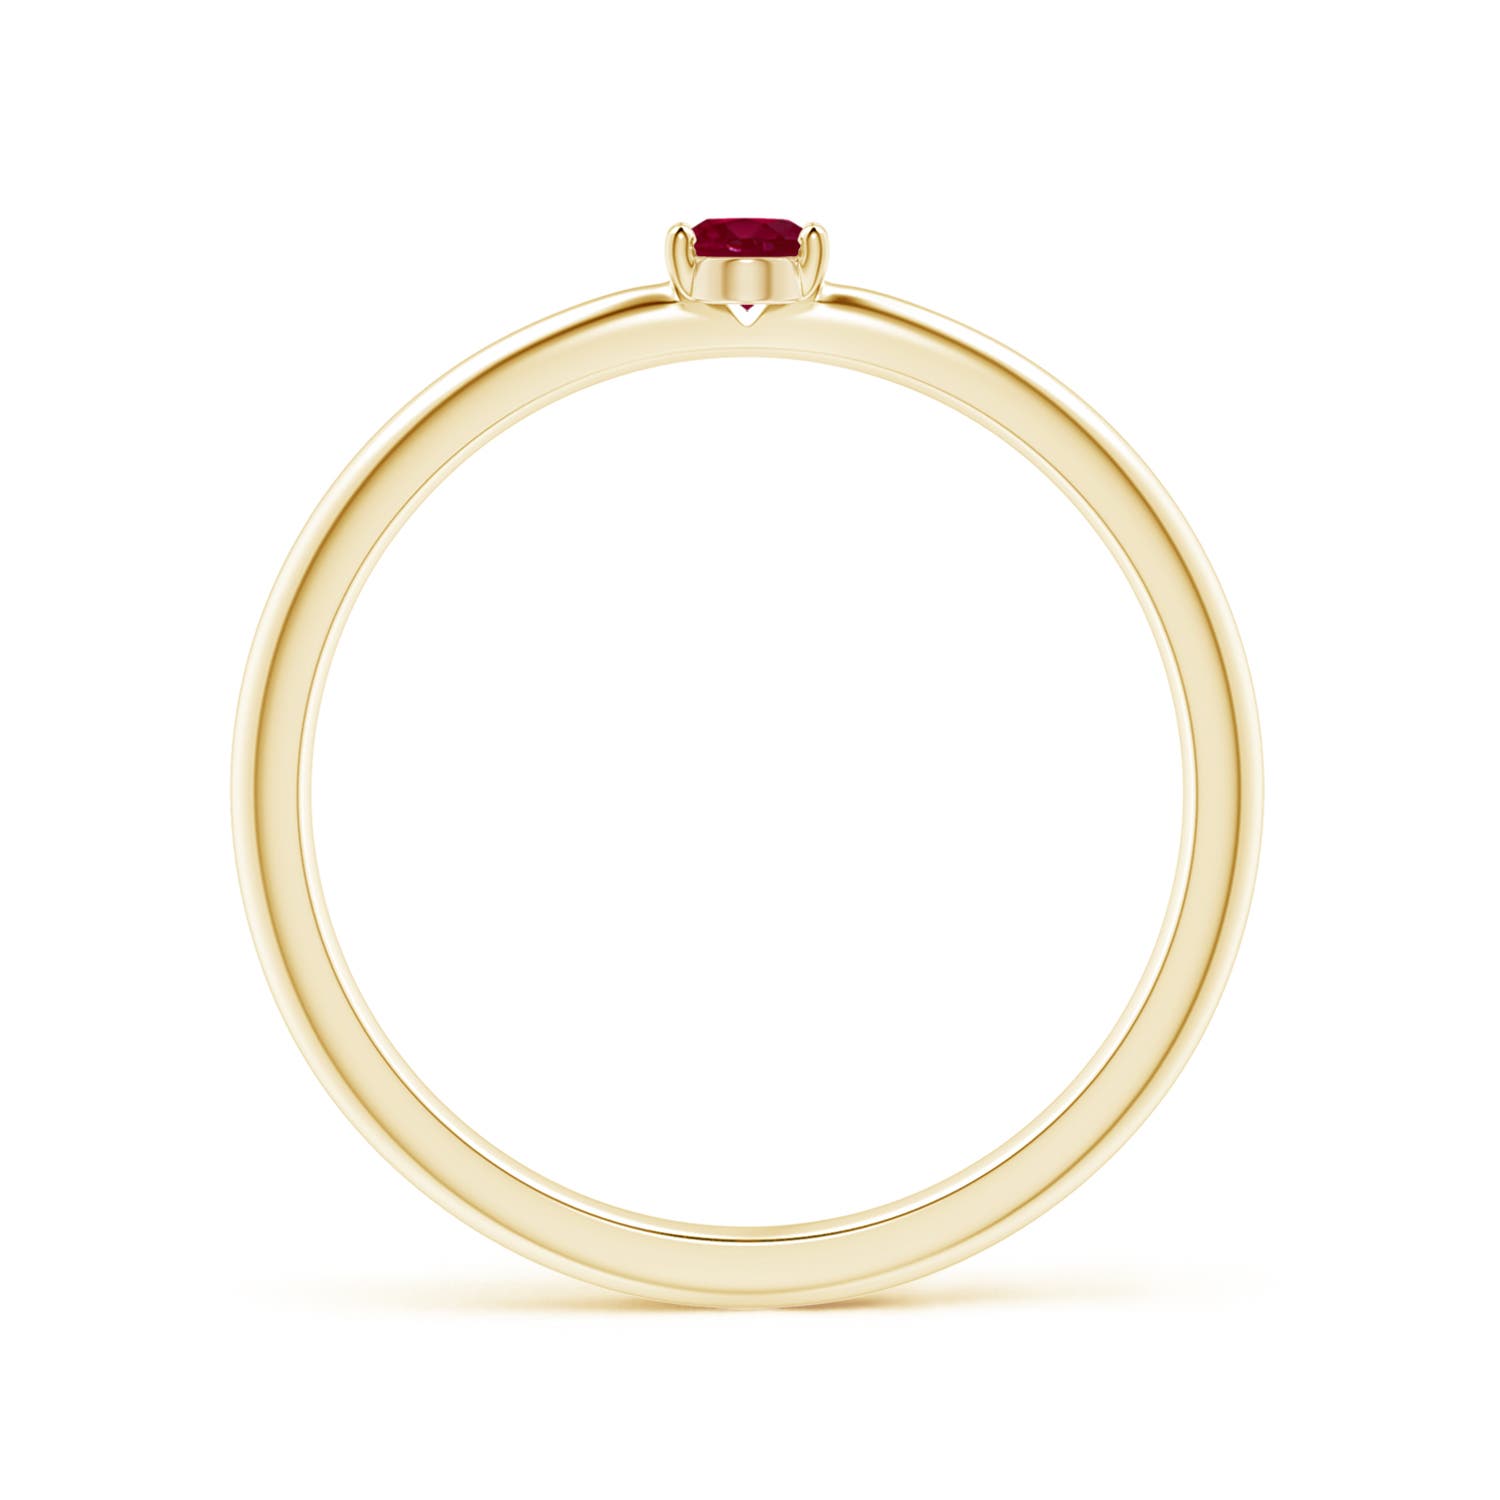 A - Ruby / 0.2 CT / 14 KT Yellow Gold